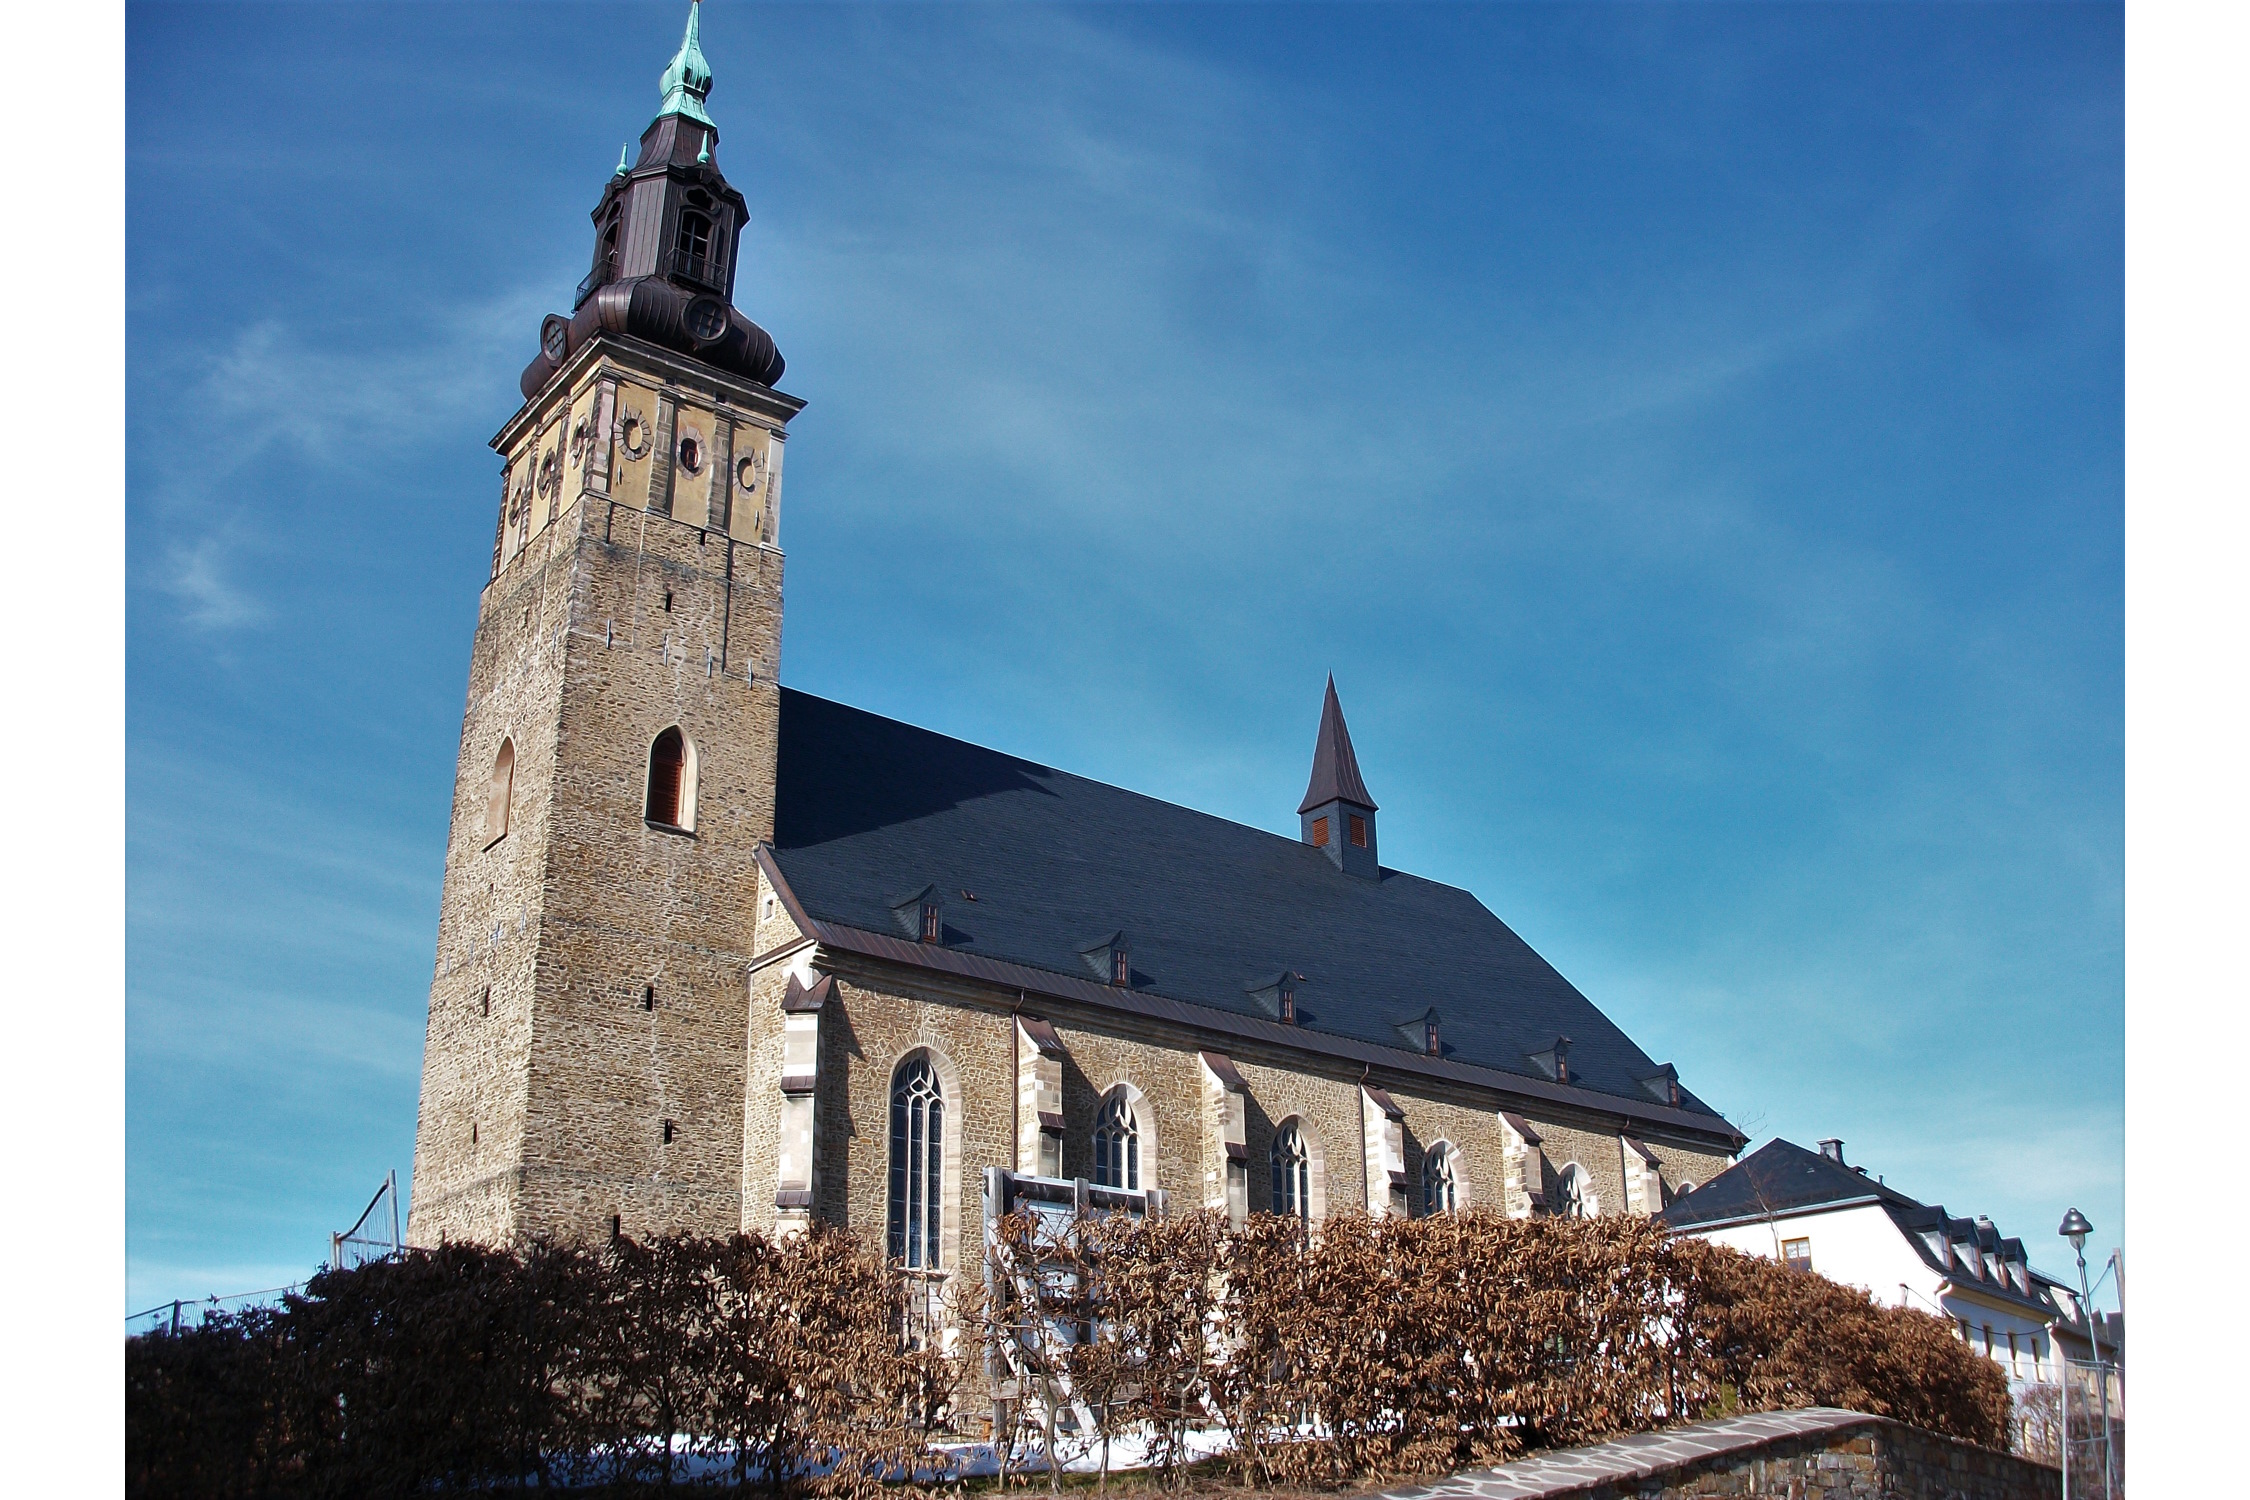 Die Wolfgangskirche Schneeberg. Foto: Aagnverglaser, CC BY-SA 4.0, https://commons.wikimedia.org/w/index.php?curid=124468052